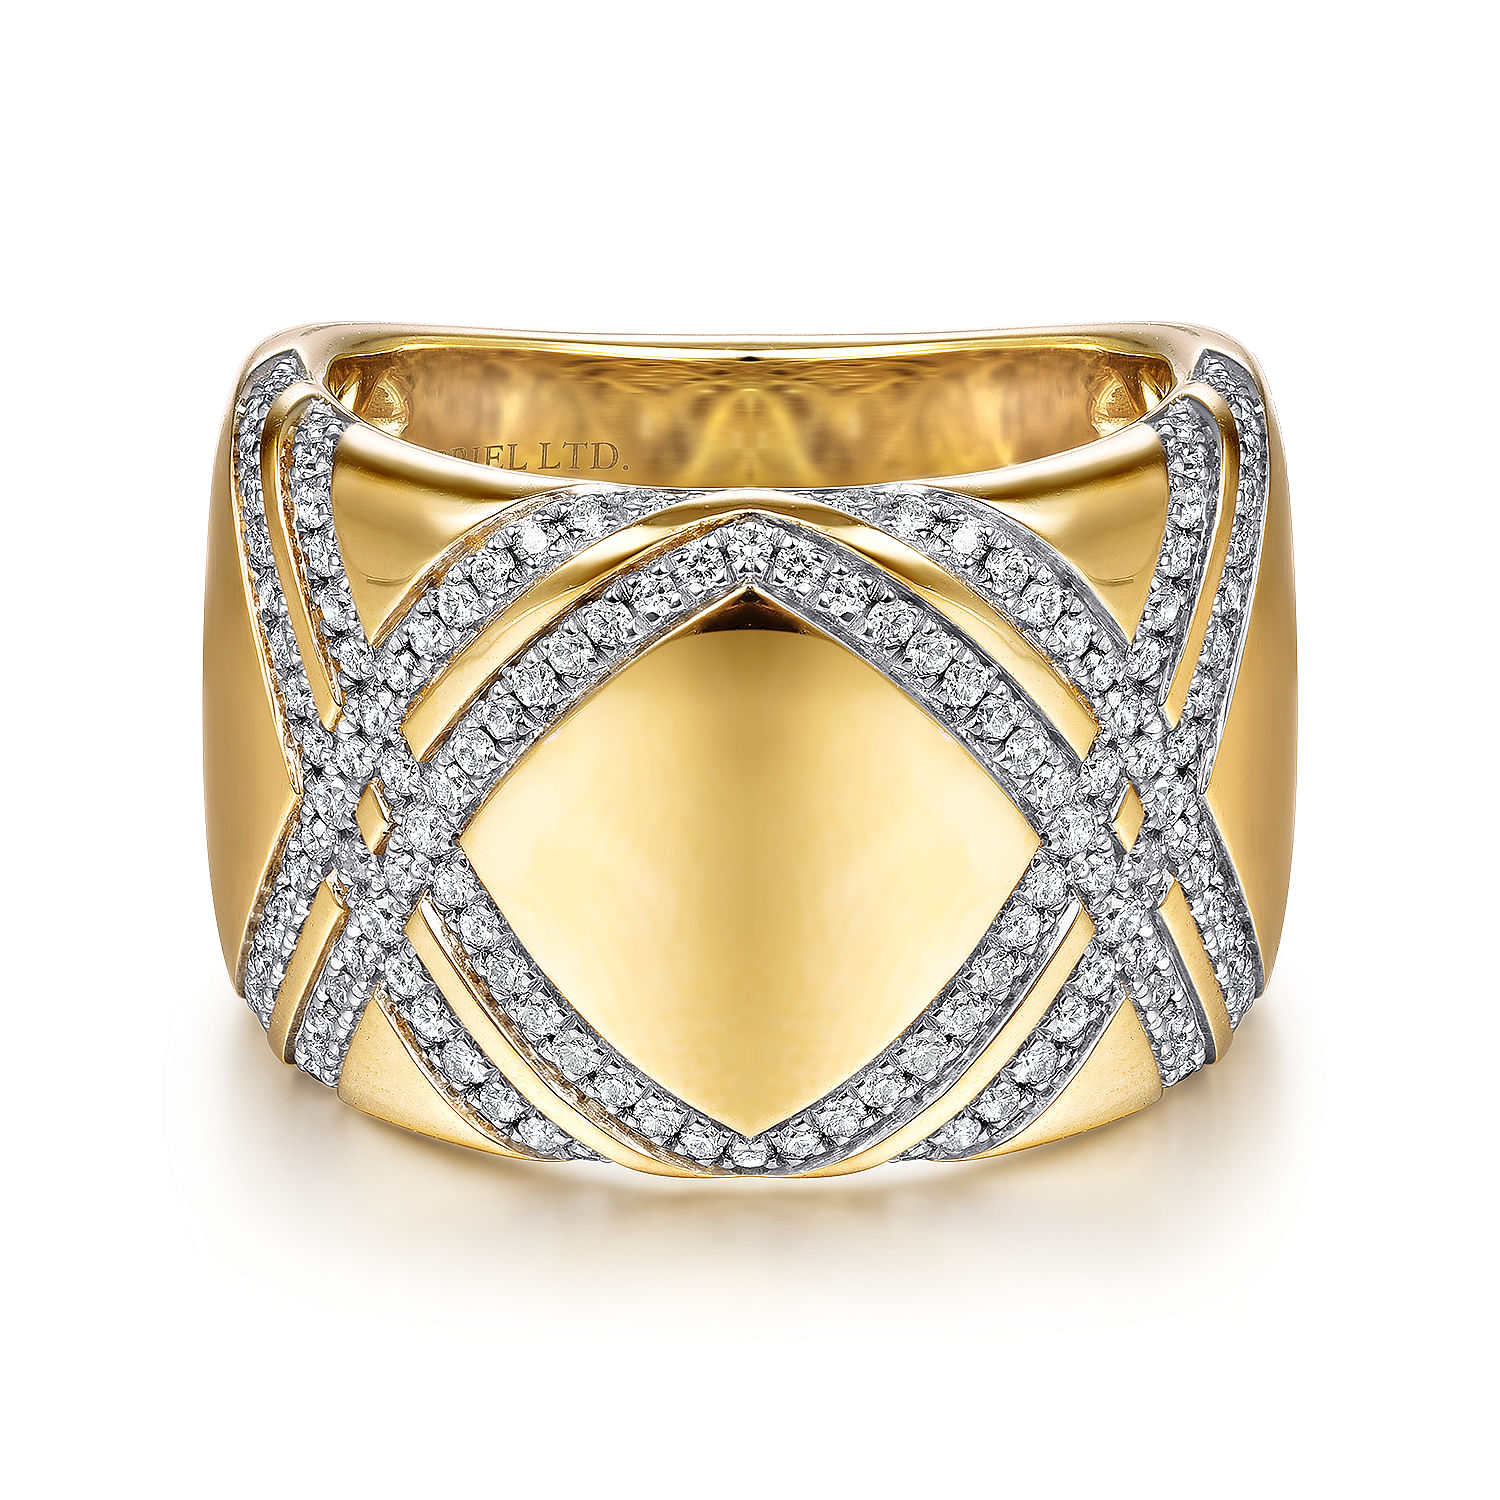 Gabriel - 18K Yellow Gold Wide Diamond Ring with Diamond Criss Crossing Rows